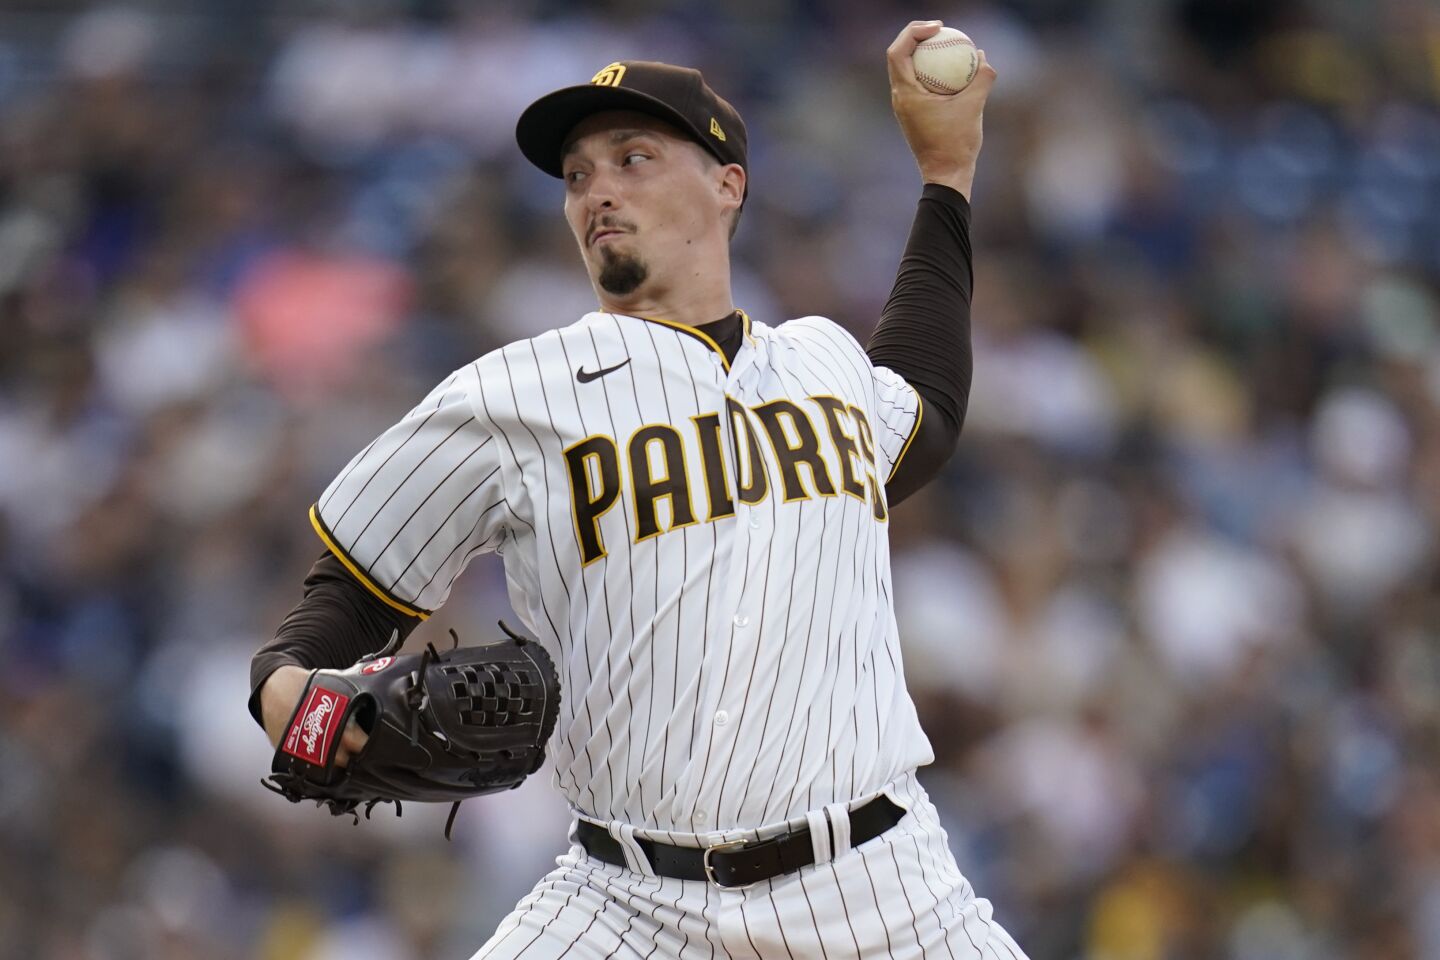 Game 3: Padres LHP Blake Snell (4-6, 3.96 ERA)He’s allowed a 1.19 ERA, struck out 29 and walked five over his last four starts, going 3-1 in that stretch. Snell allowed four runs on six hits and four walks in four innings last year against a Nationals team that still employed Juan Soto and Josh Bell.